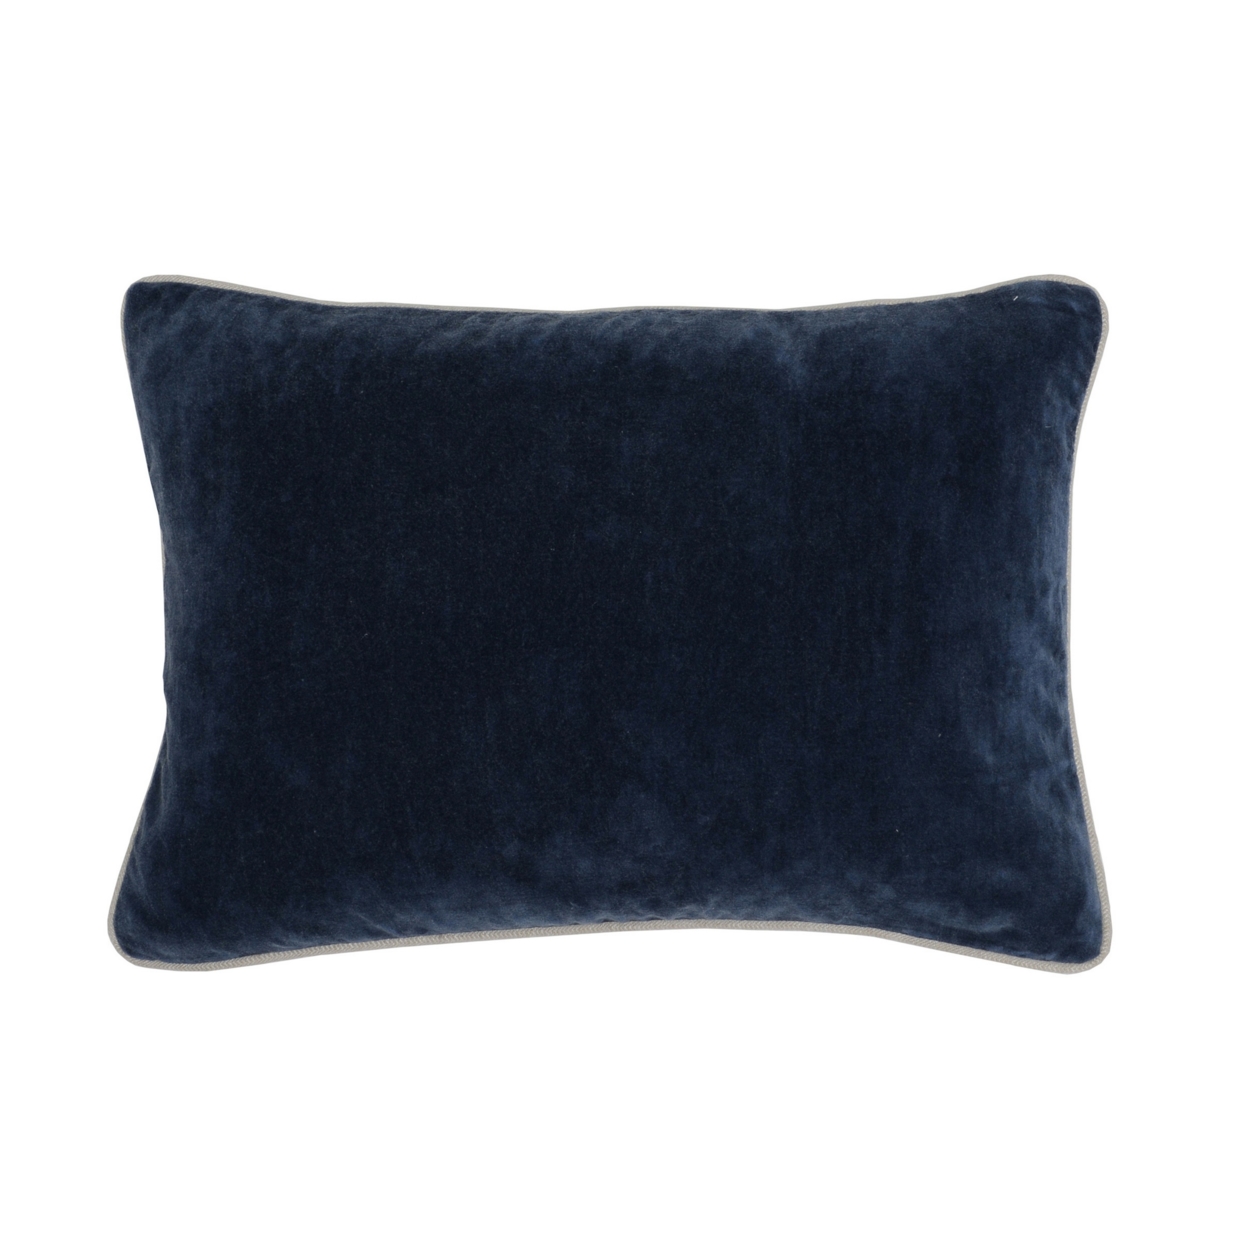 Rectangular Fabric Throw Pillow With Solid Color And Piped Edges, Navy Blue- Saltoro Sherpi